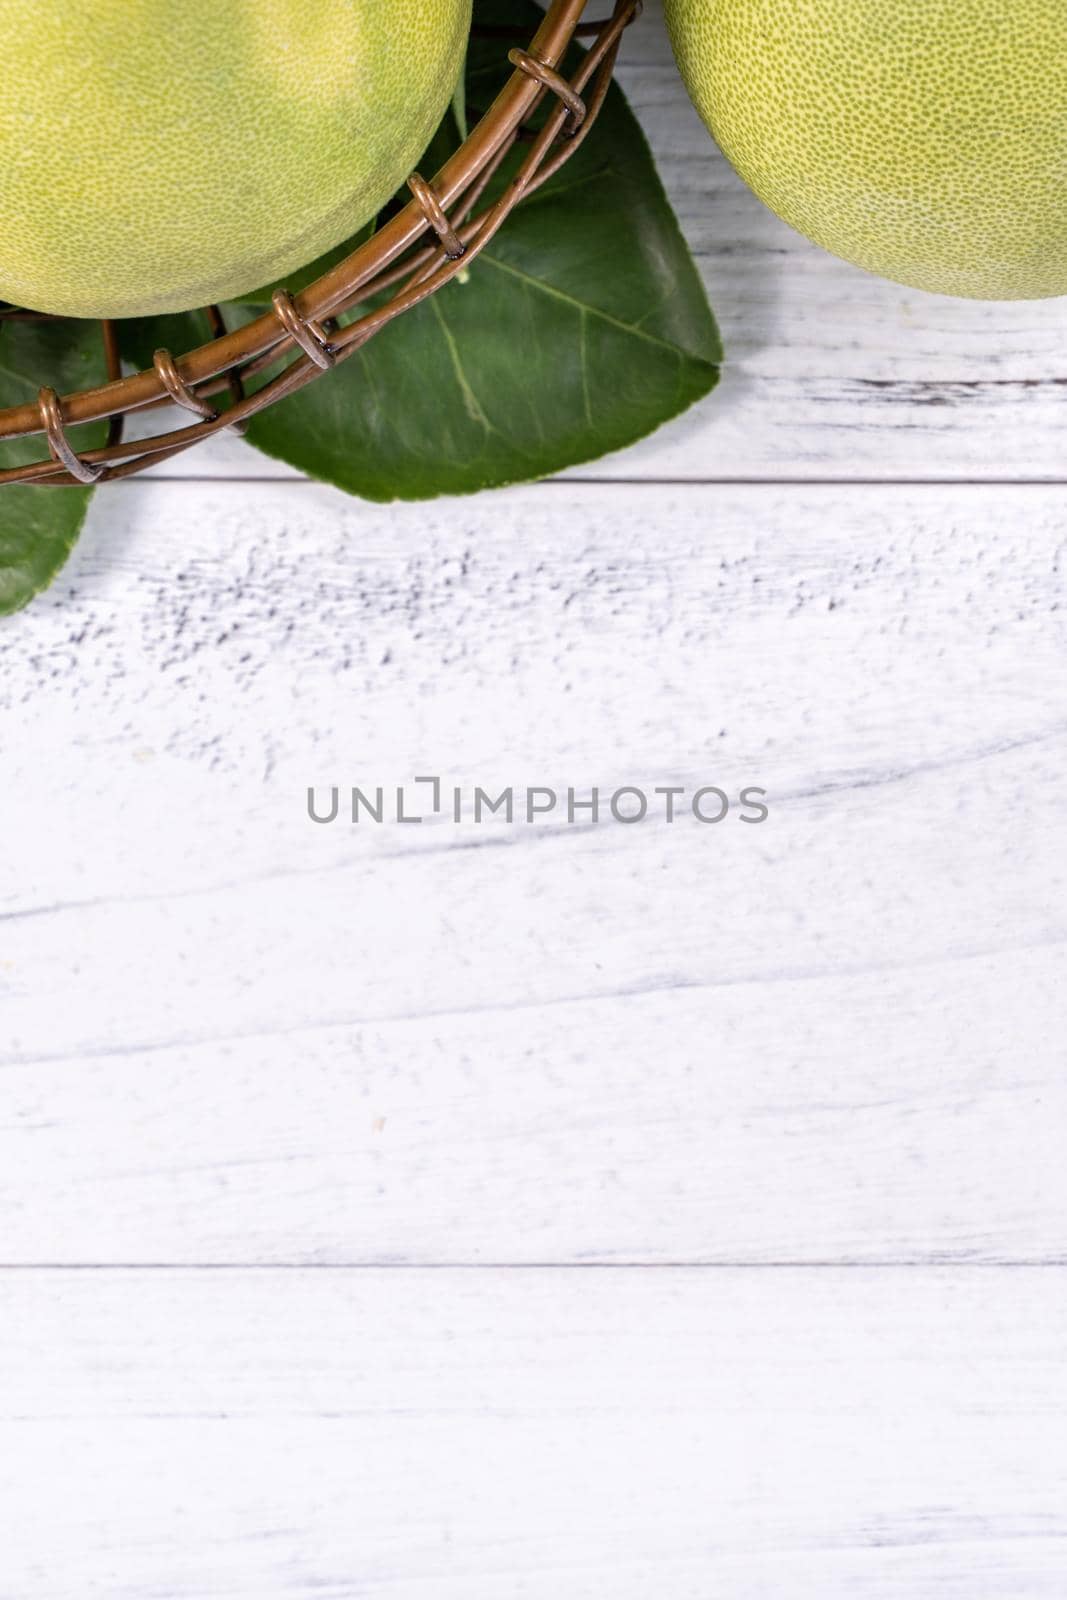 Fresh peeled pomelo, pummelo, grapefruit, shaddock on bright wooden background. Autumn seasonal fruit, top view, flat lay, tabletop shot. by ROMIXIMAGE